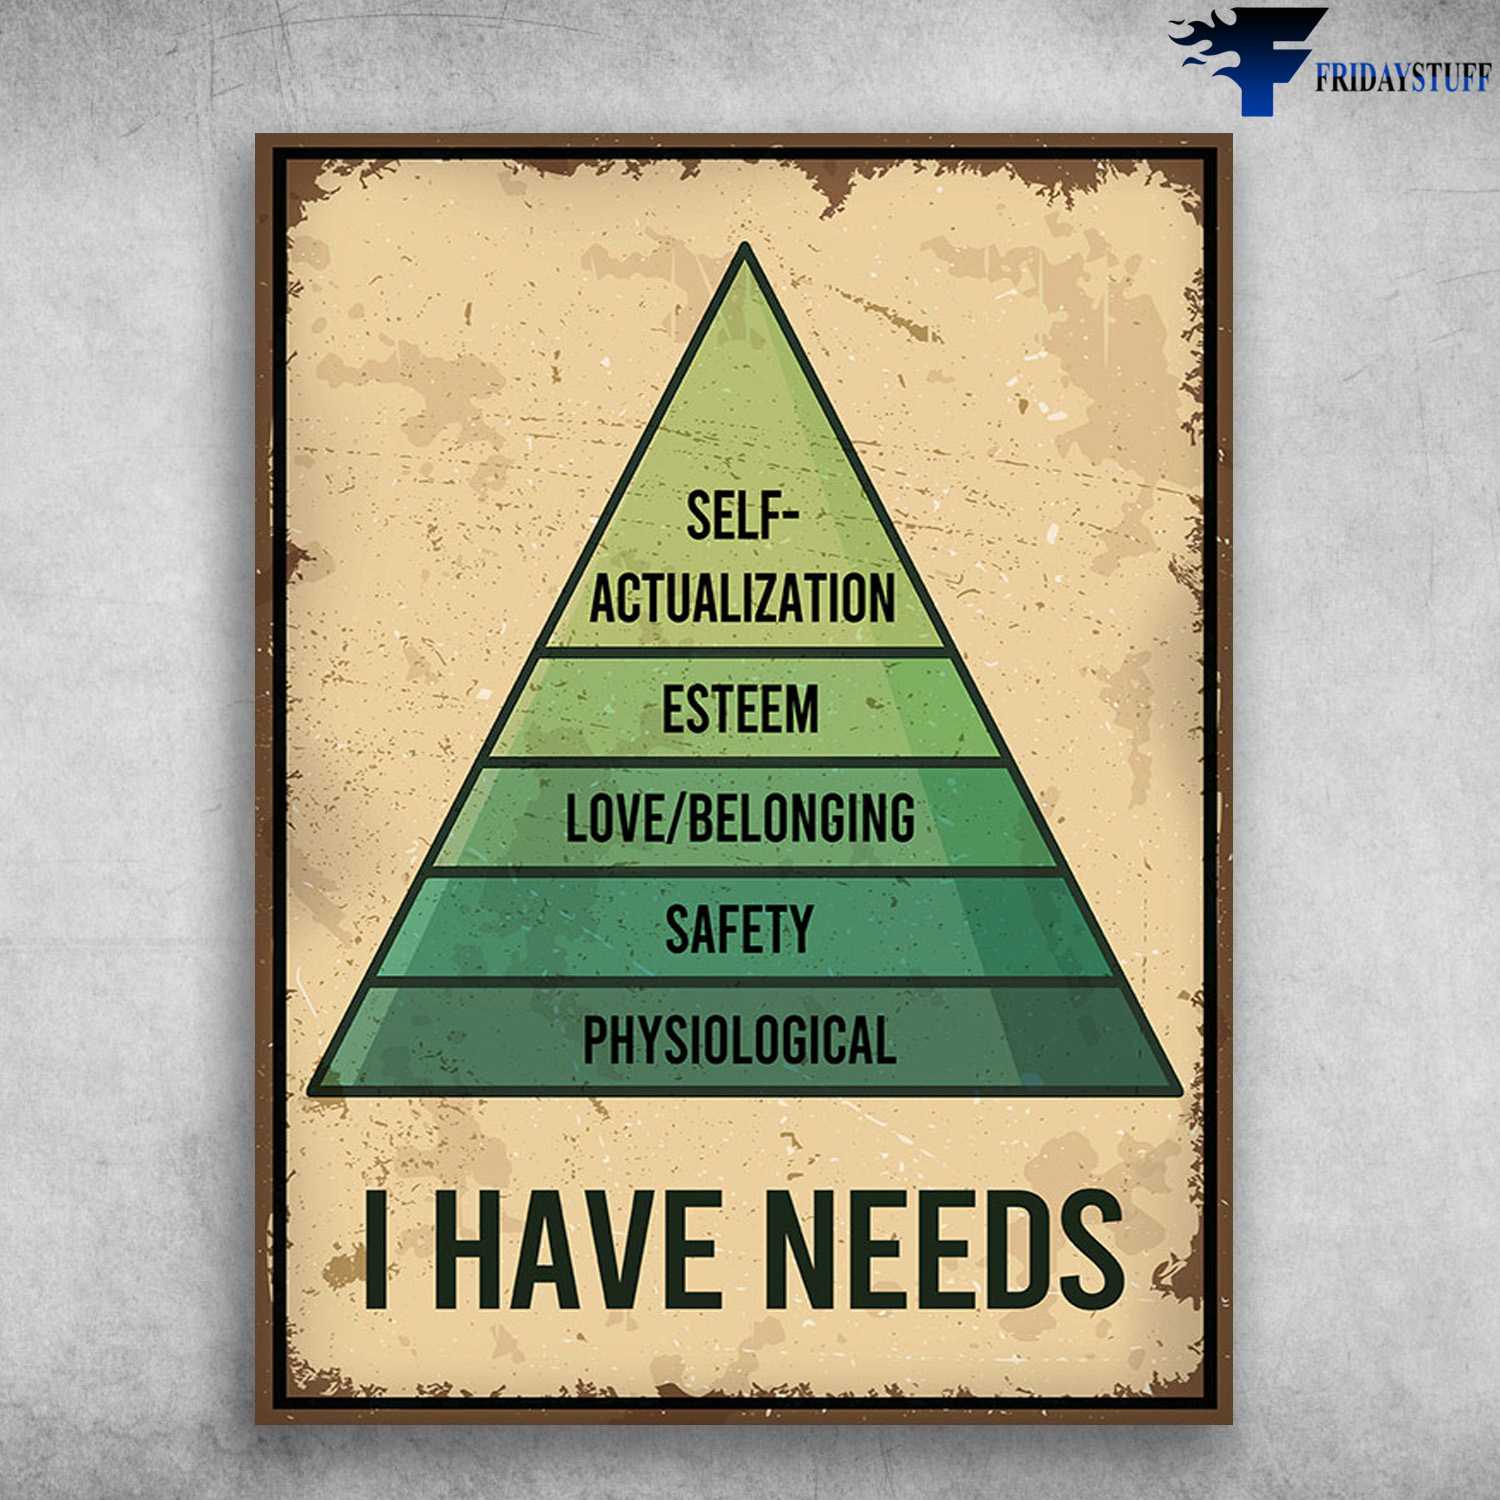 Pyramid Of Needs - Self-Actualization, Esteem, Love Belonging, Safety, Physiological, I Have Needs